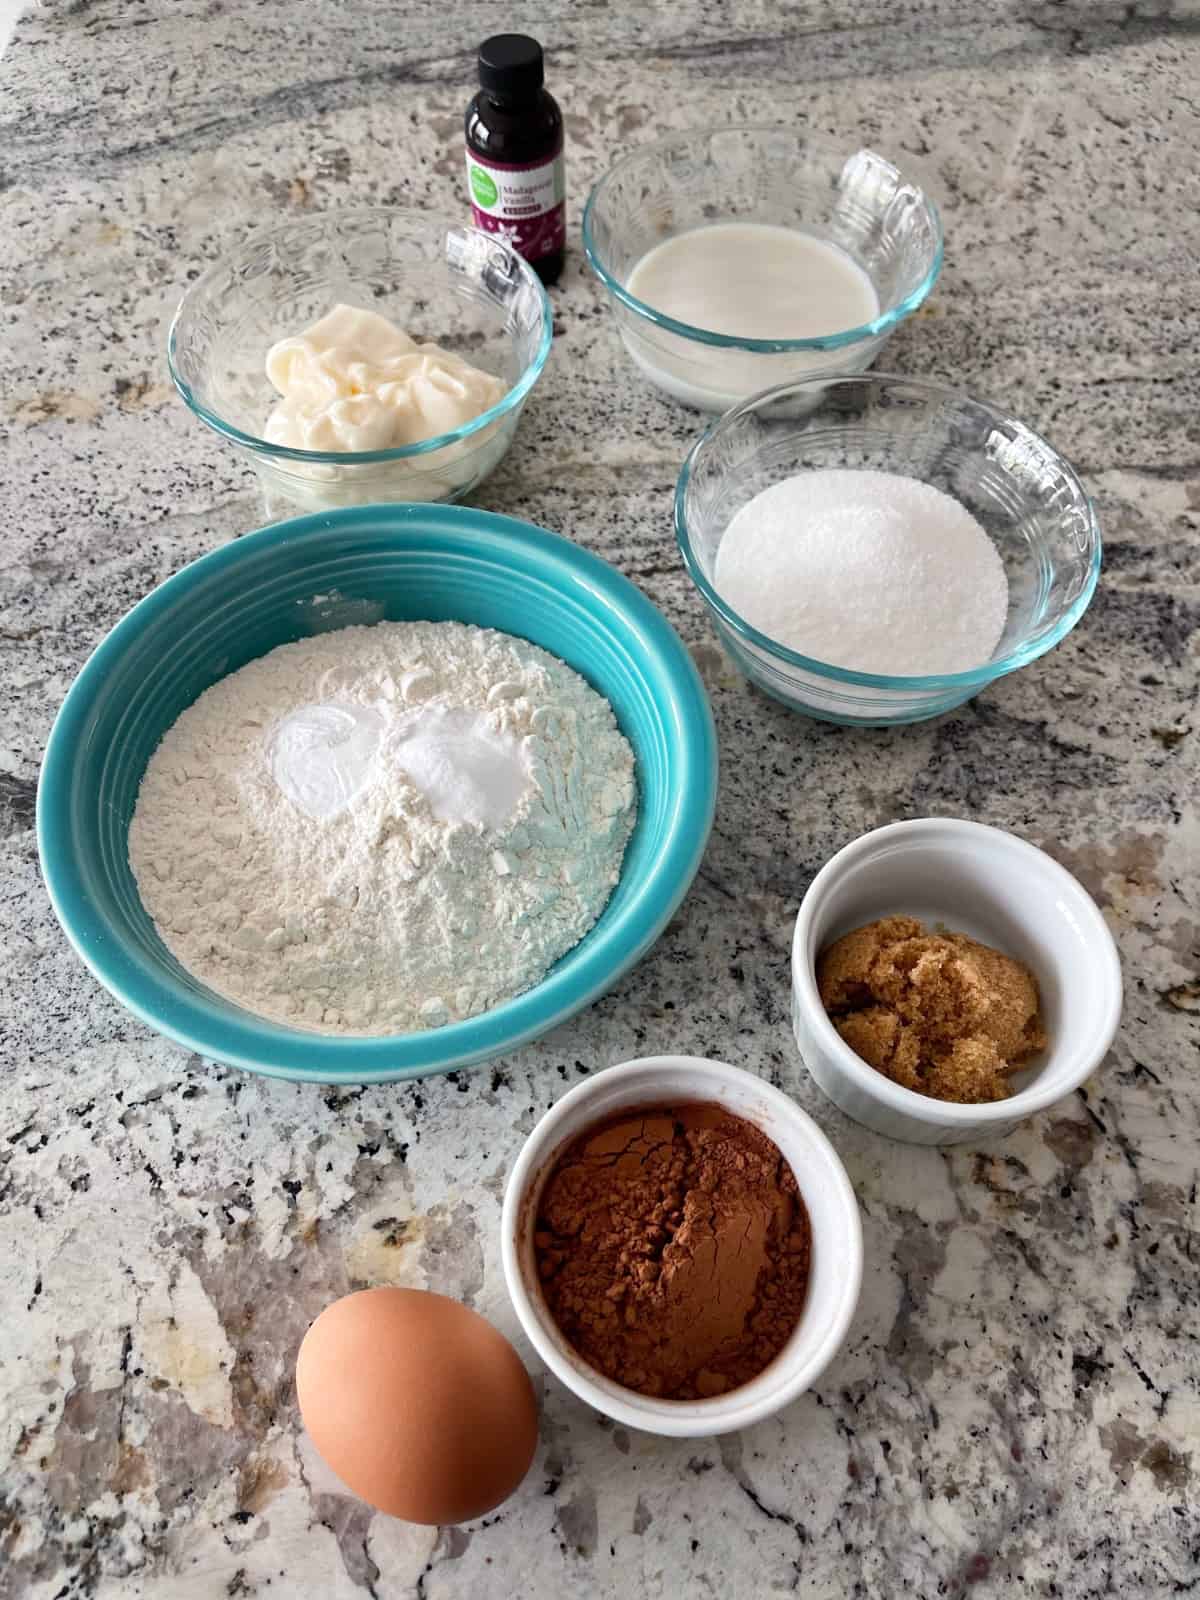 Ingredients including vanilla extract, light mayonnaise, 0 calorie sweetener, flour, brown sugar, cocoa and an egg.